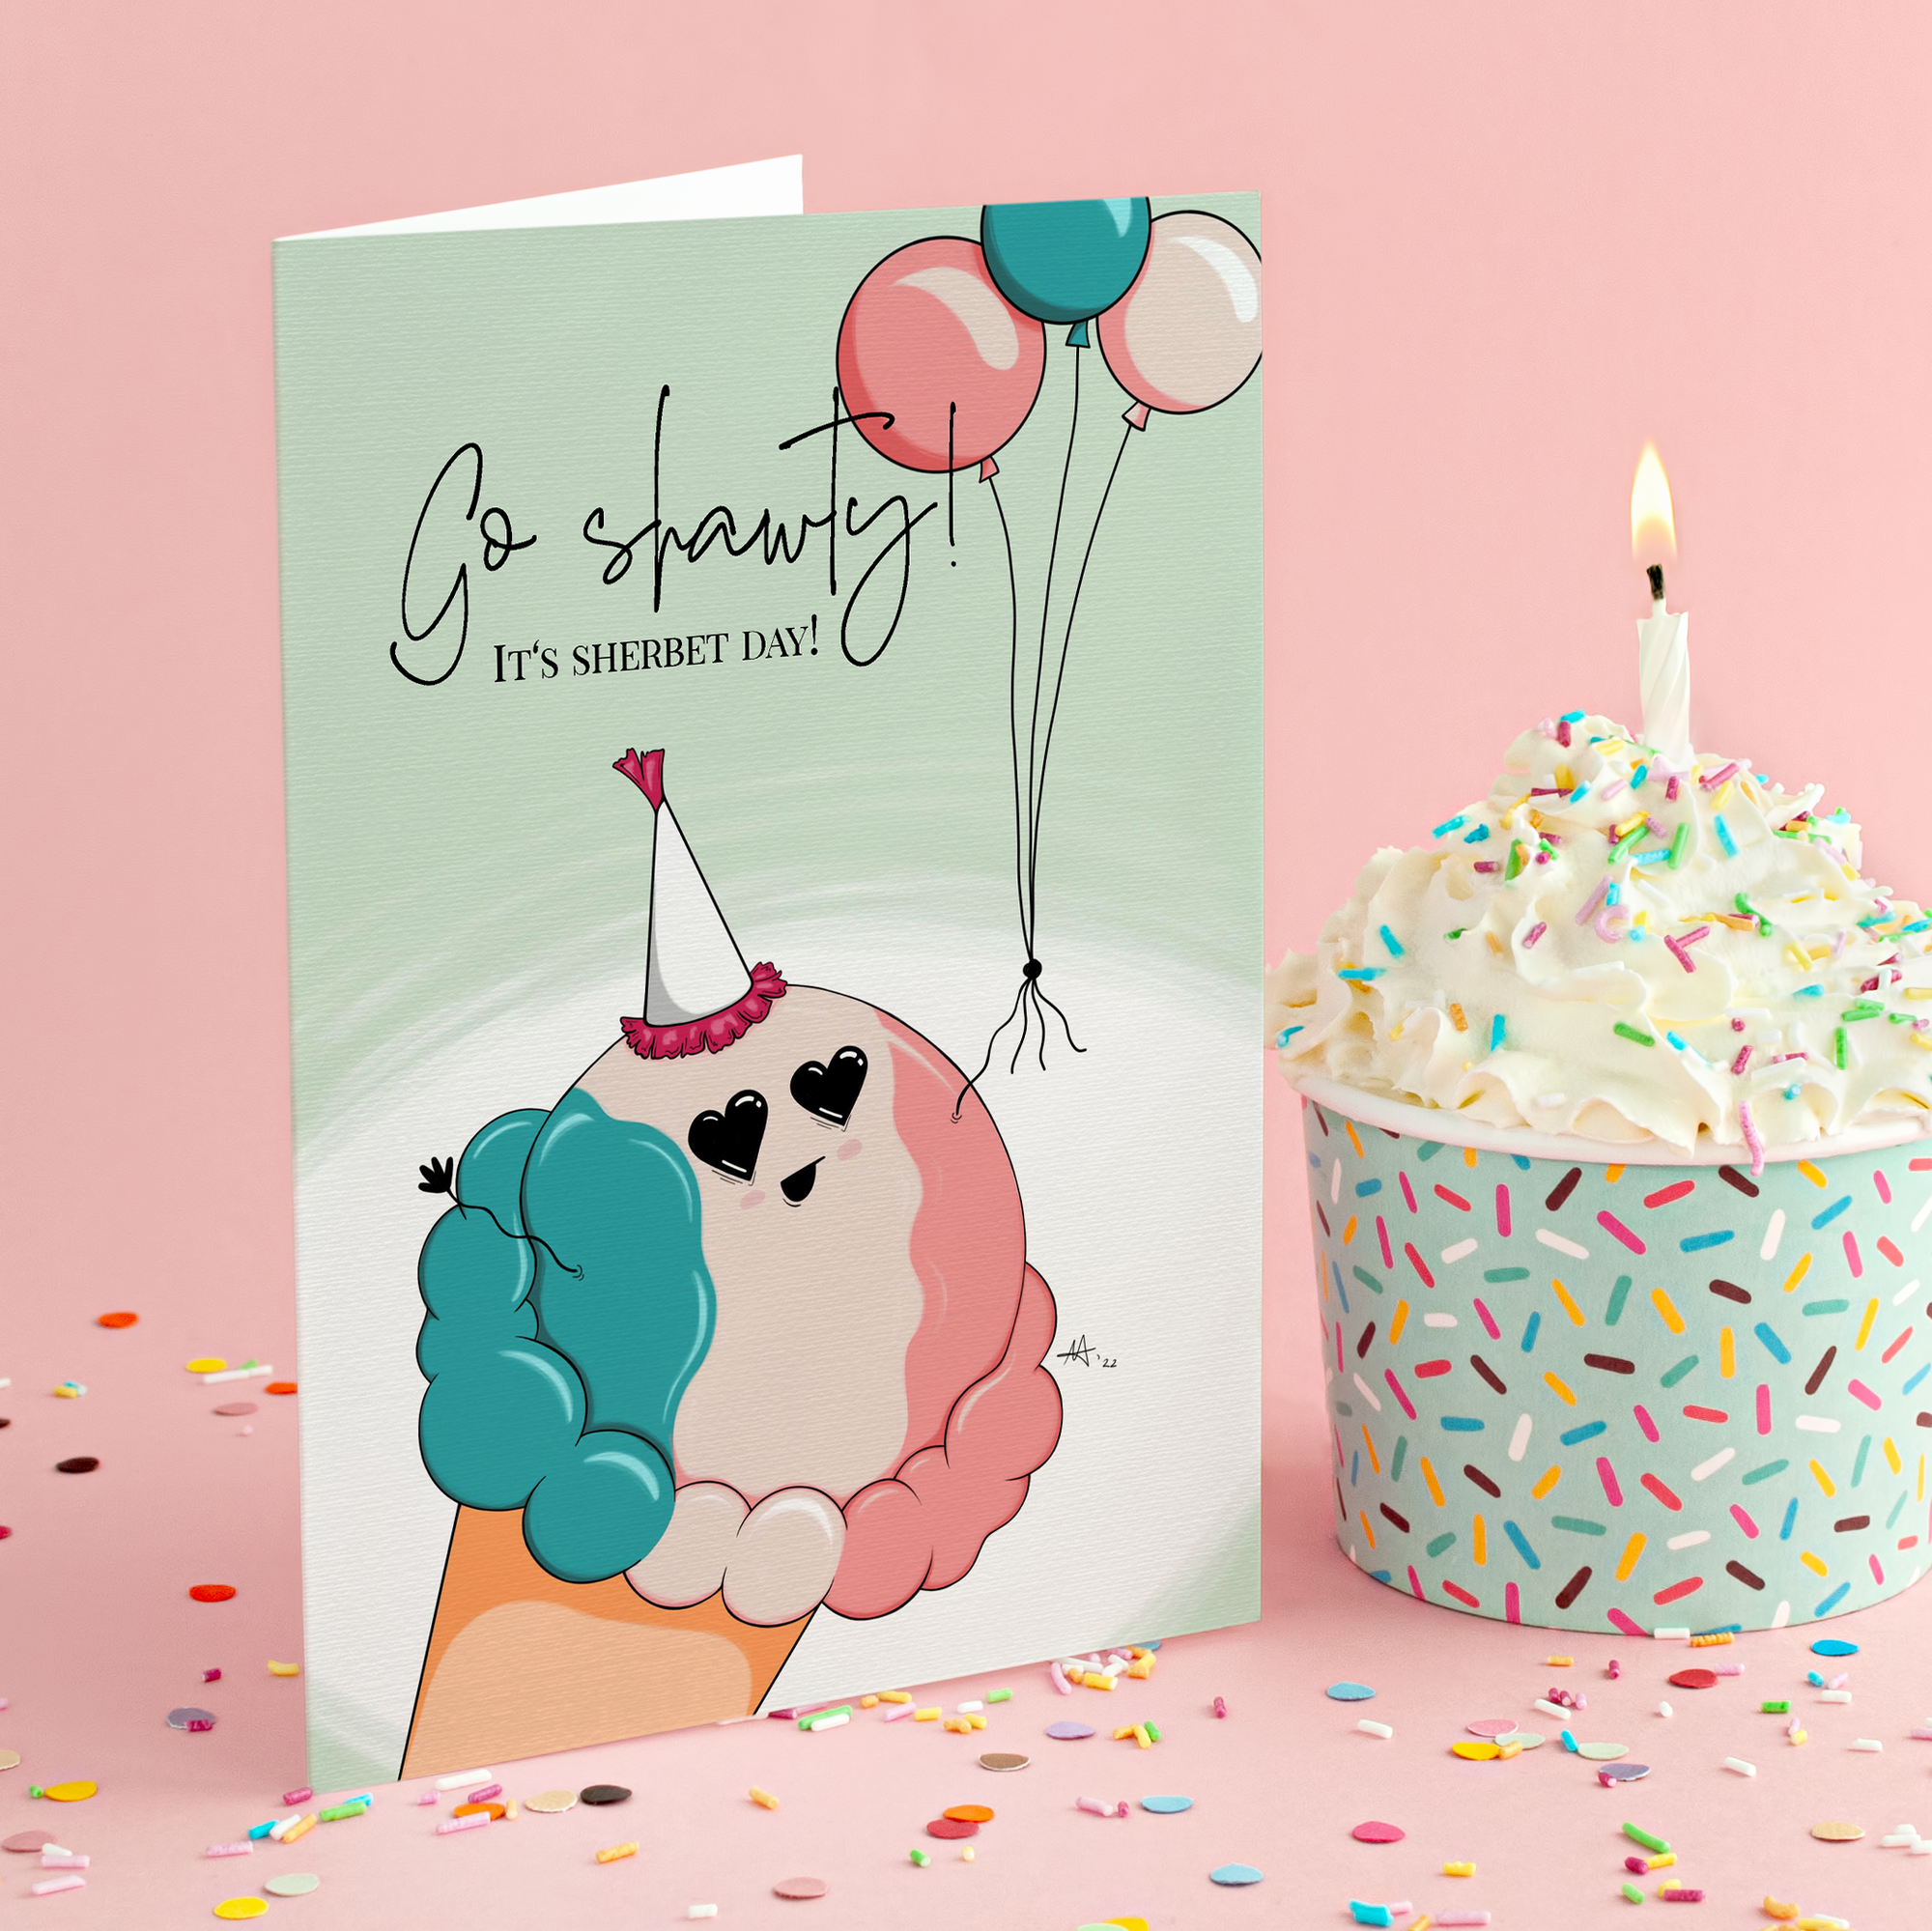 "Go shawty! It's sherbet day!" - Greeting Card / Small Print